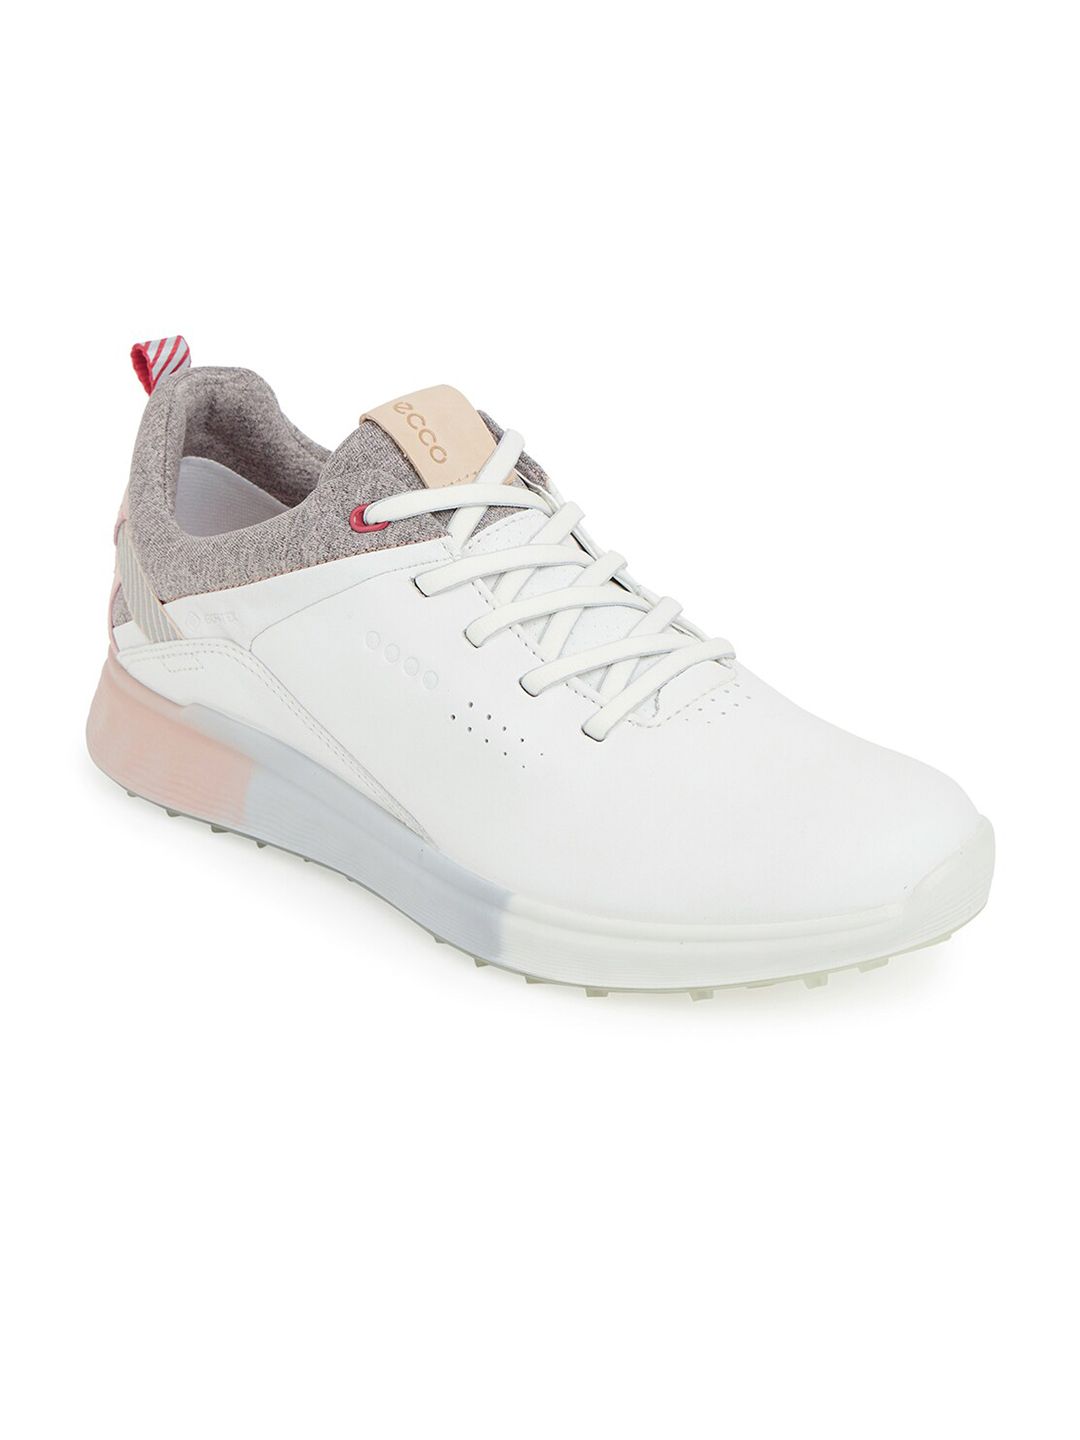 ECCO Women White Hybrid Leather Golf Non-Marking Shoes Price in India